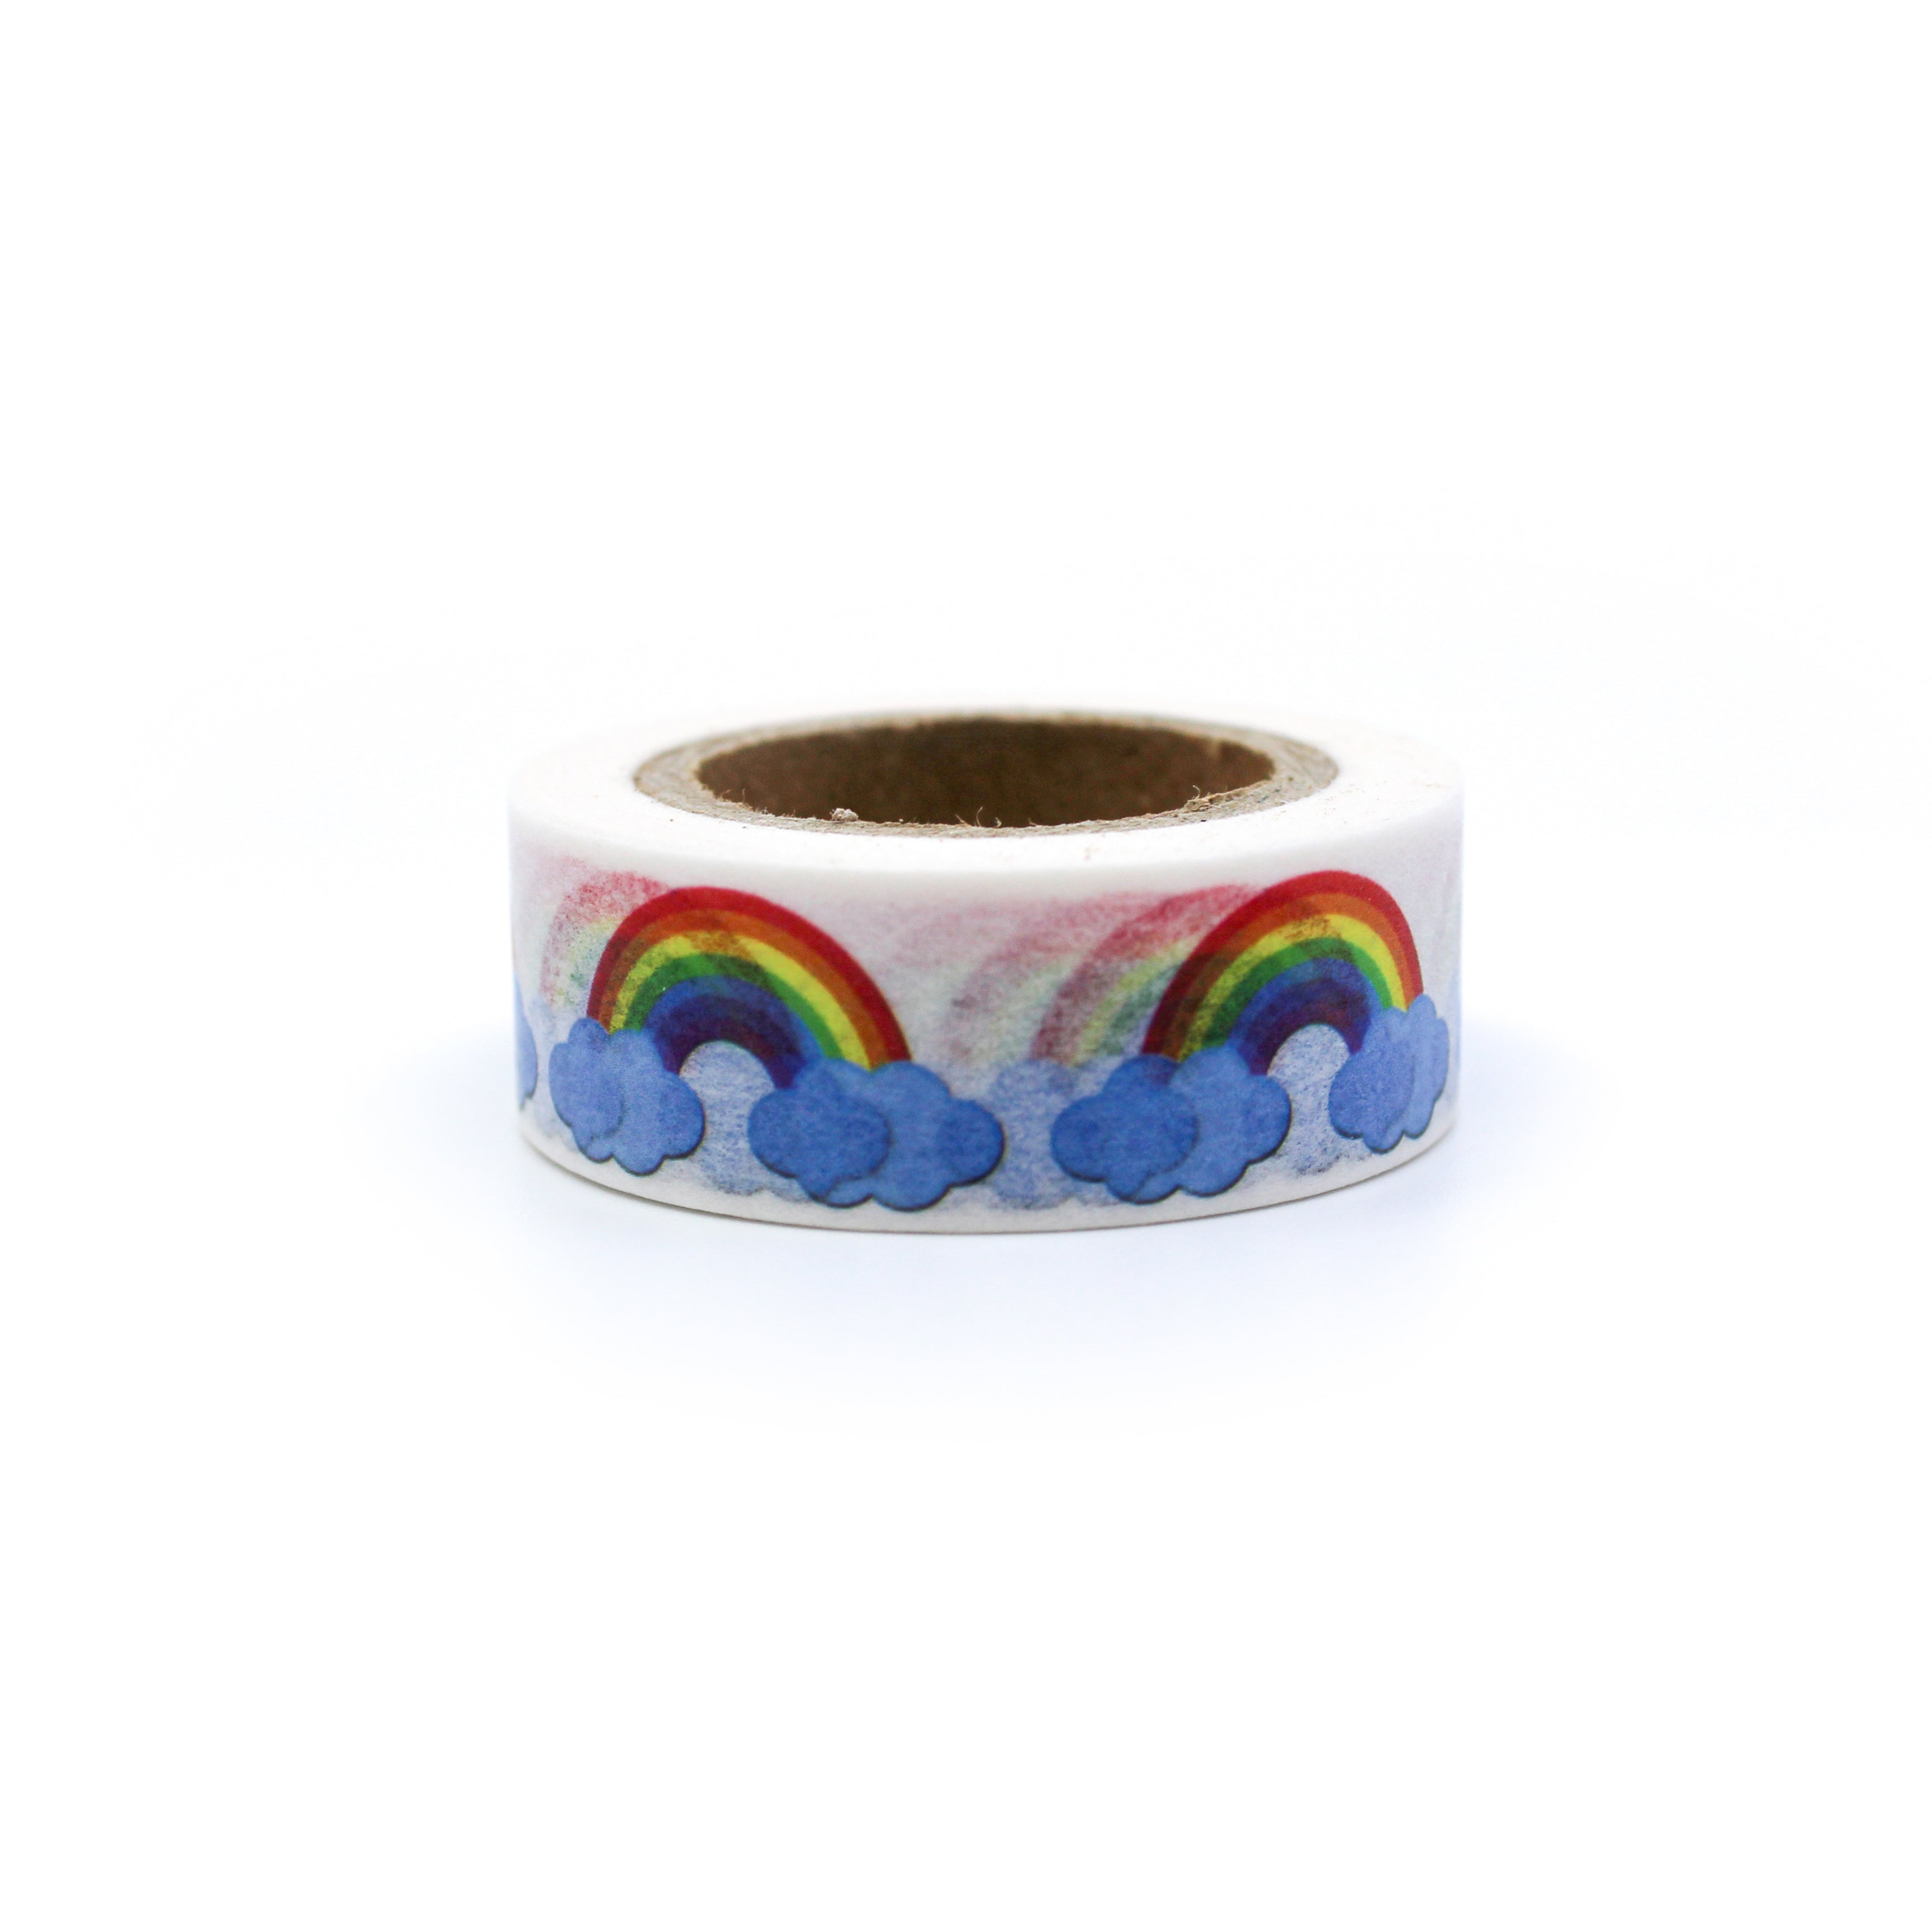 This is a rainbows and clouds in a white background washi tape from BBB Supplies Craft Shop